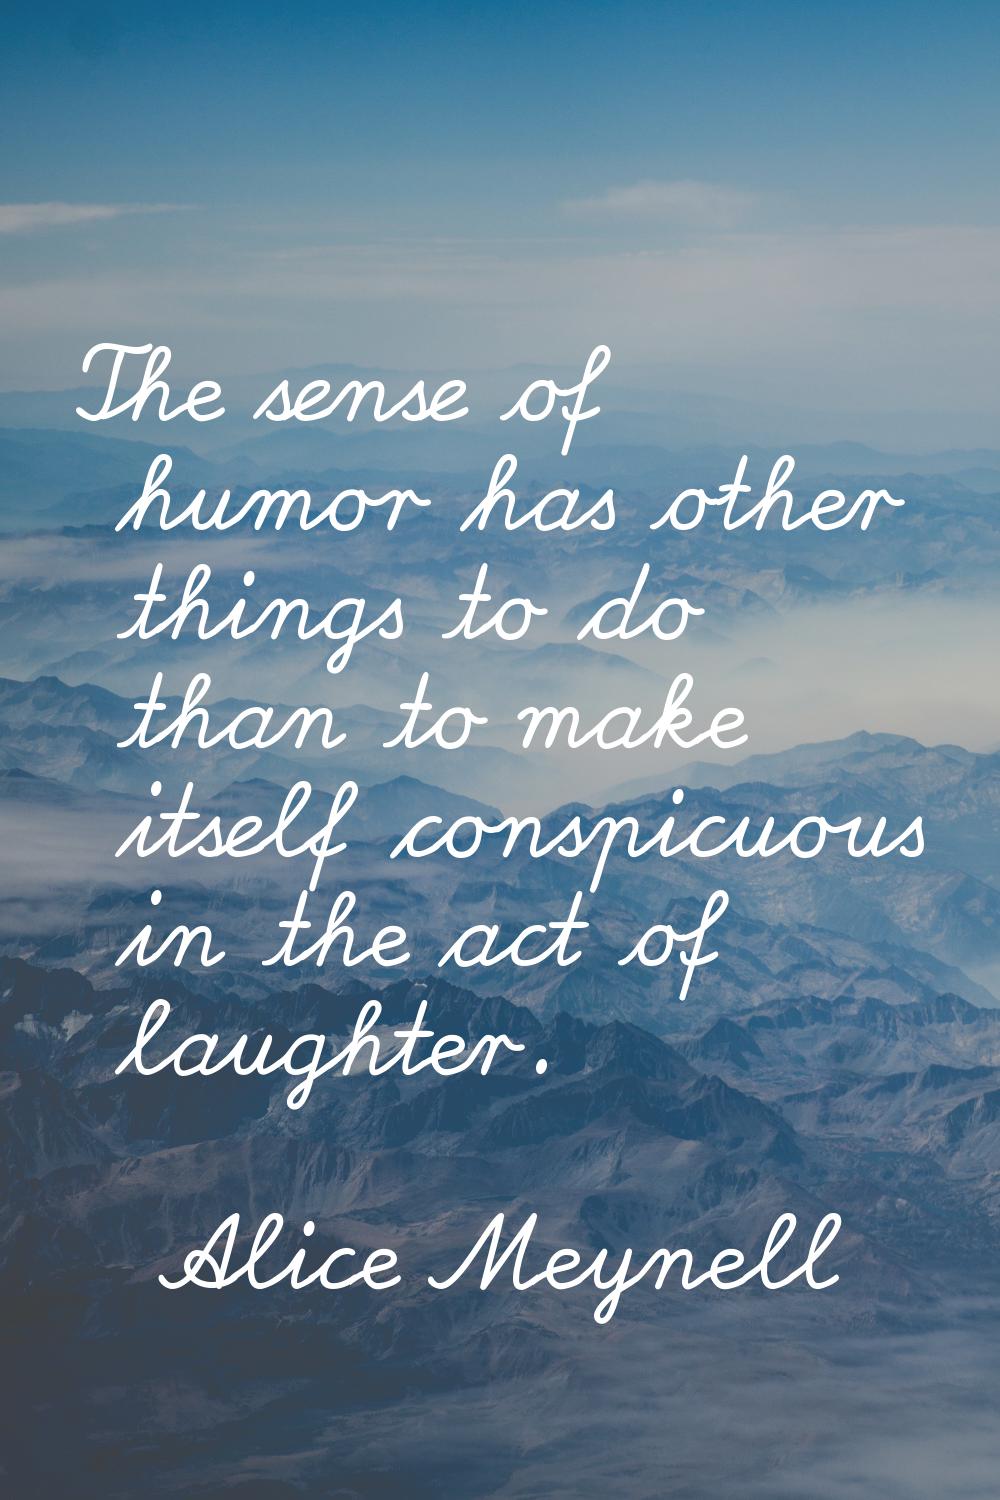 The sense of humor has other things to do than to make itself conspicuous in the act of laughter.